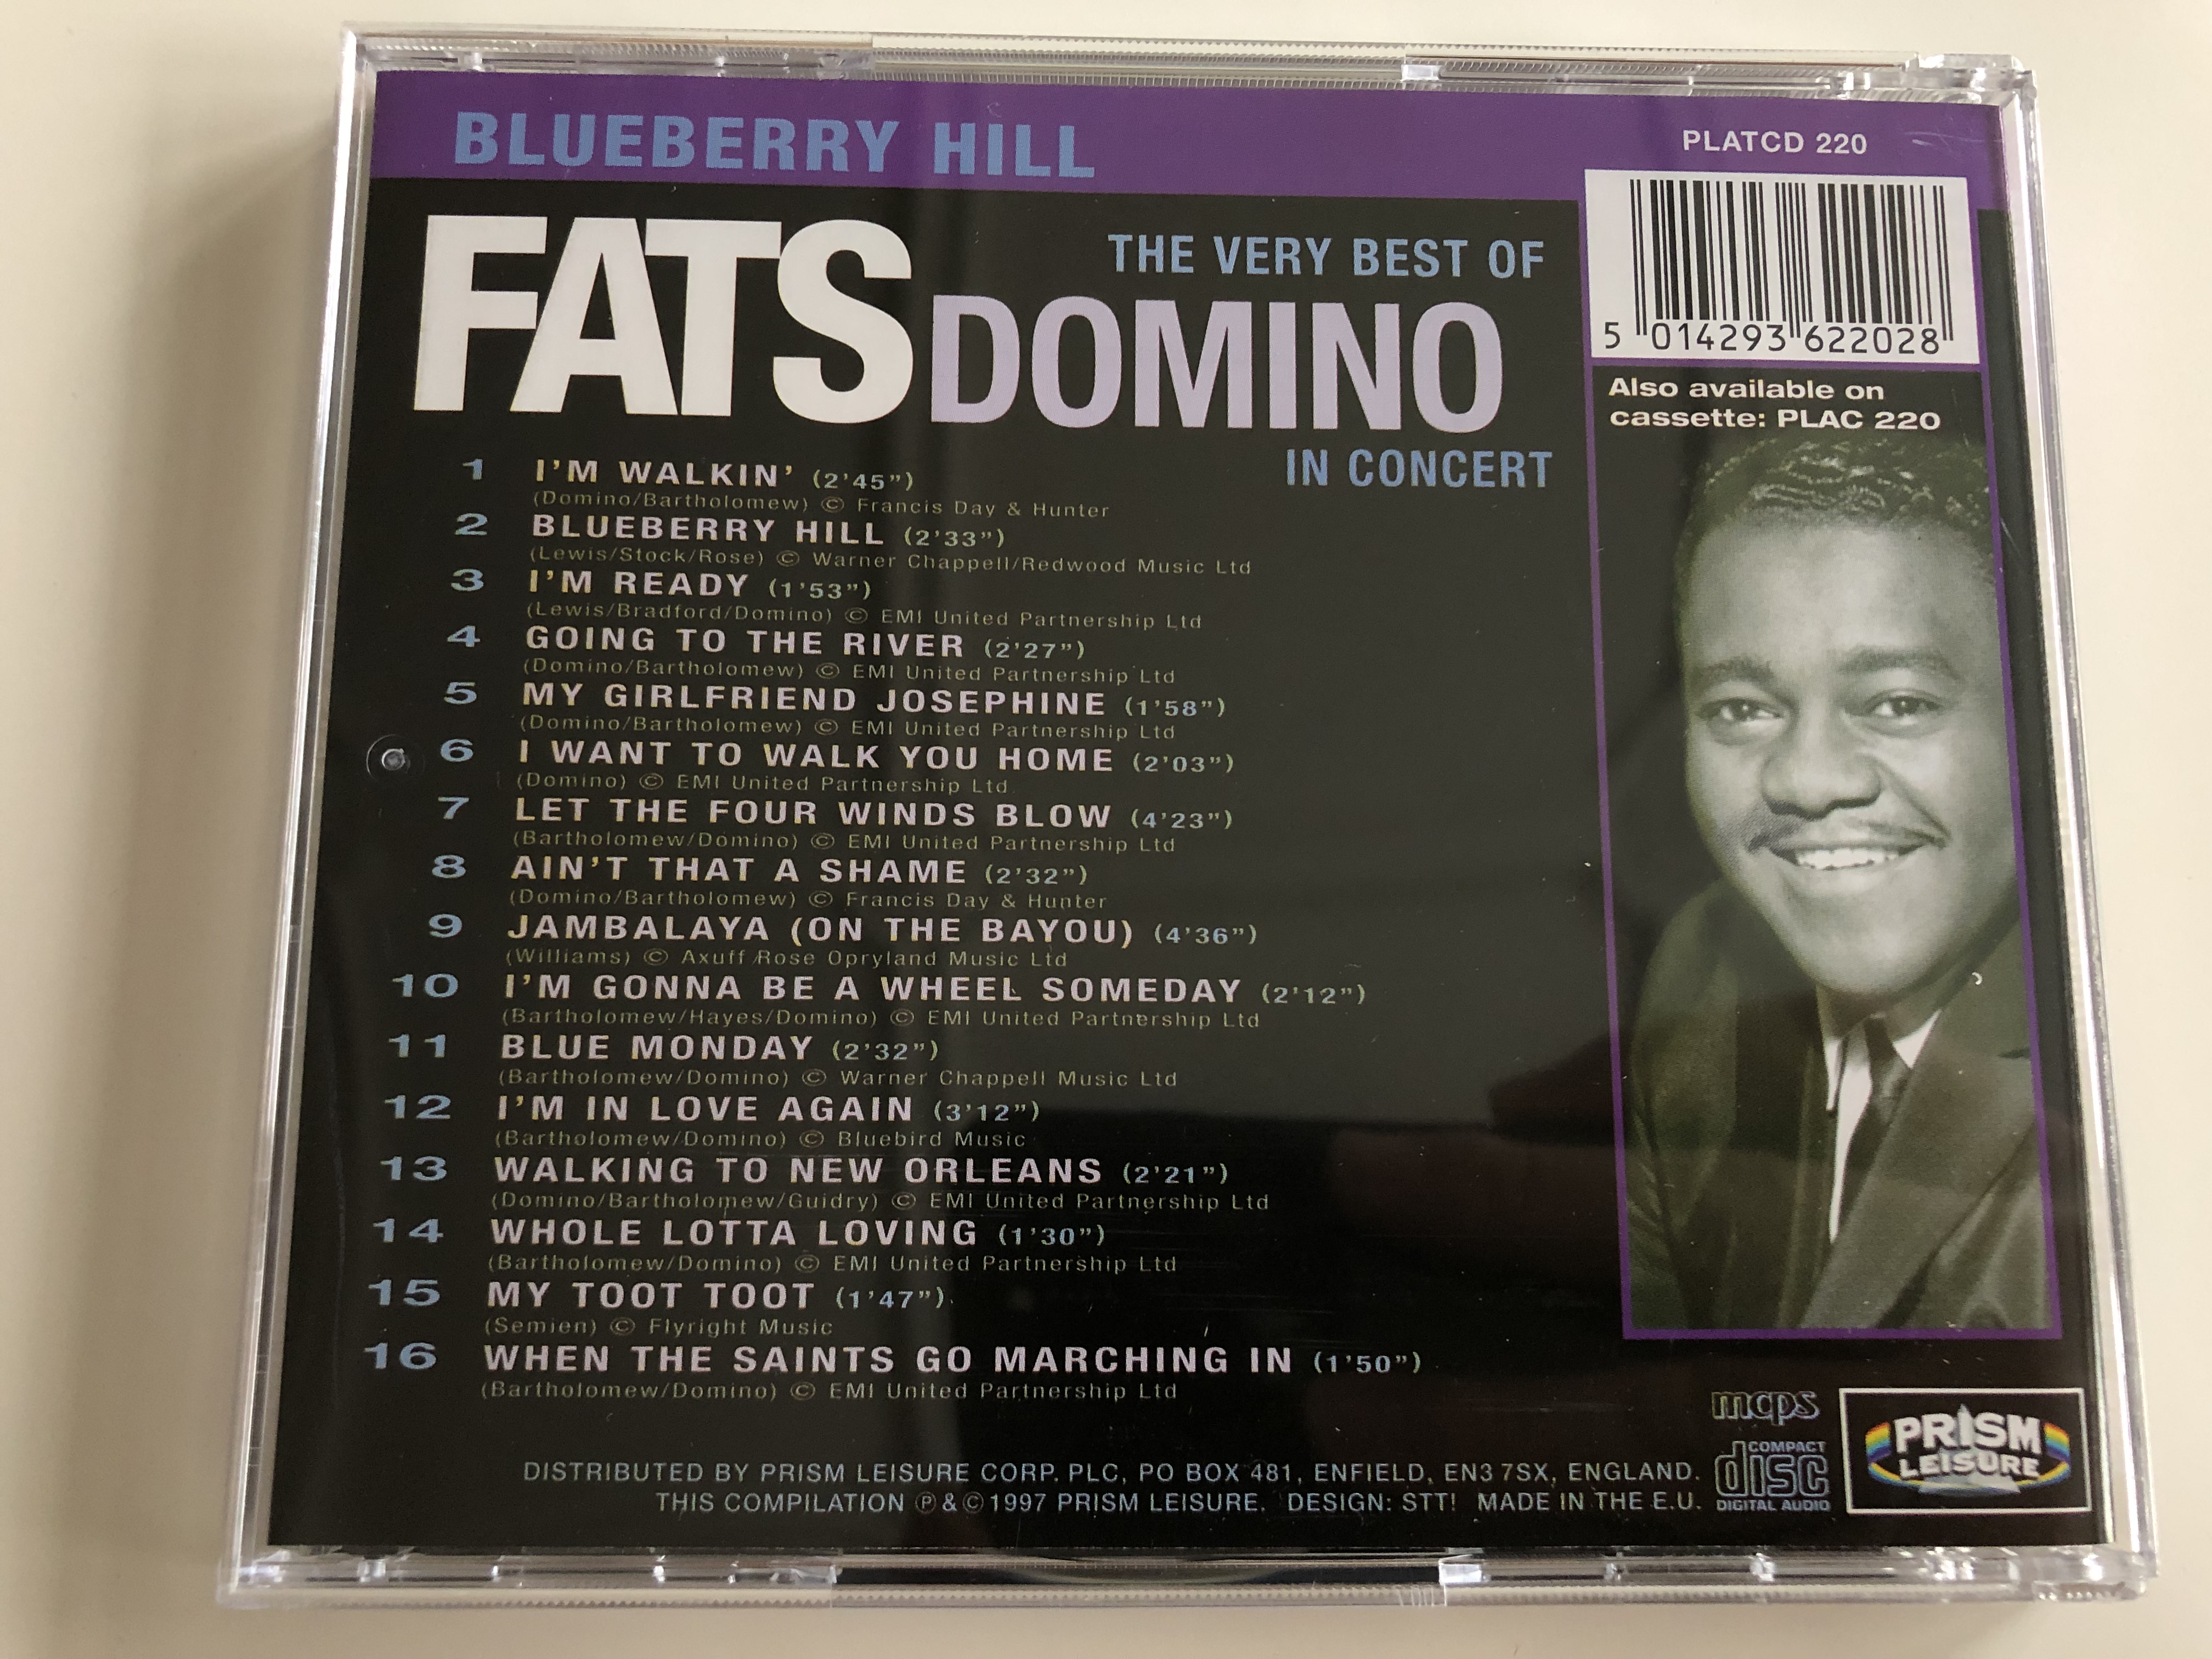 blueberry-hill-the-very-best-of-fats-domino-in-concert-audio-cd-1997-platcd-220-4-.jpg